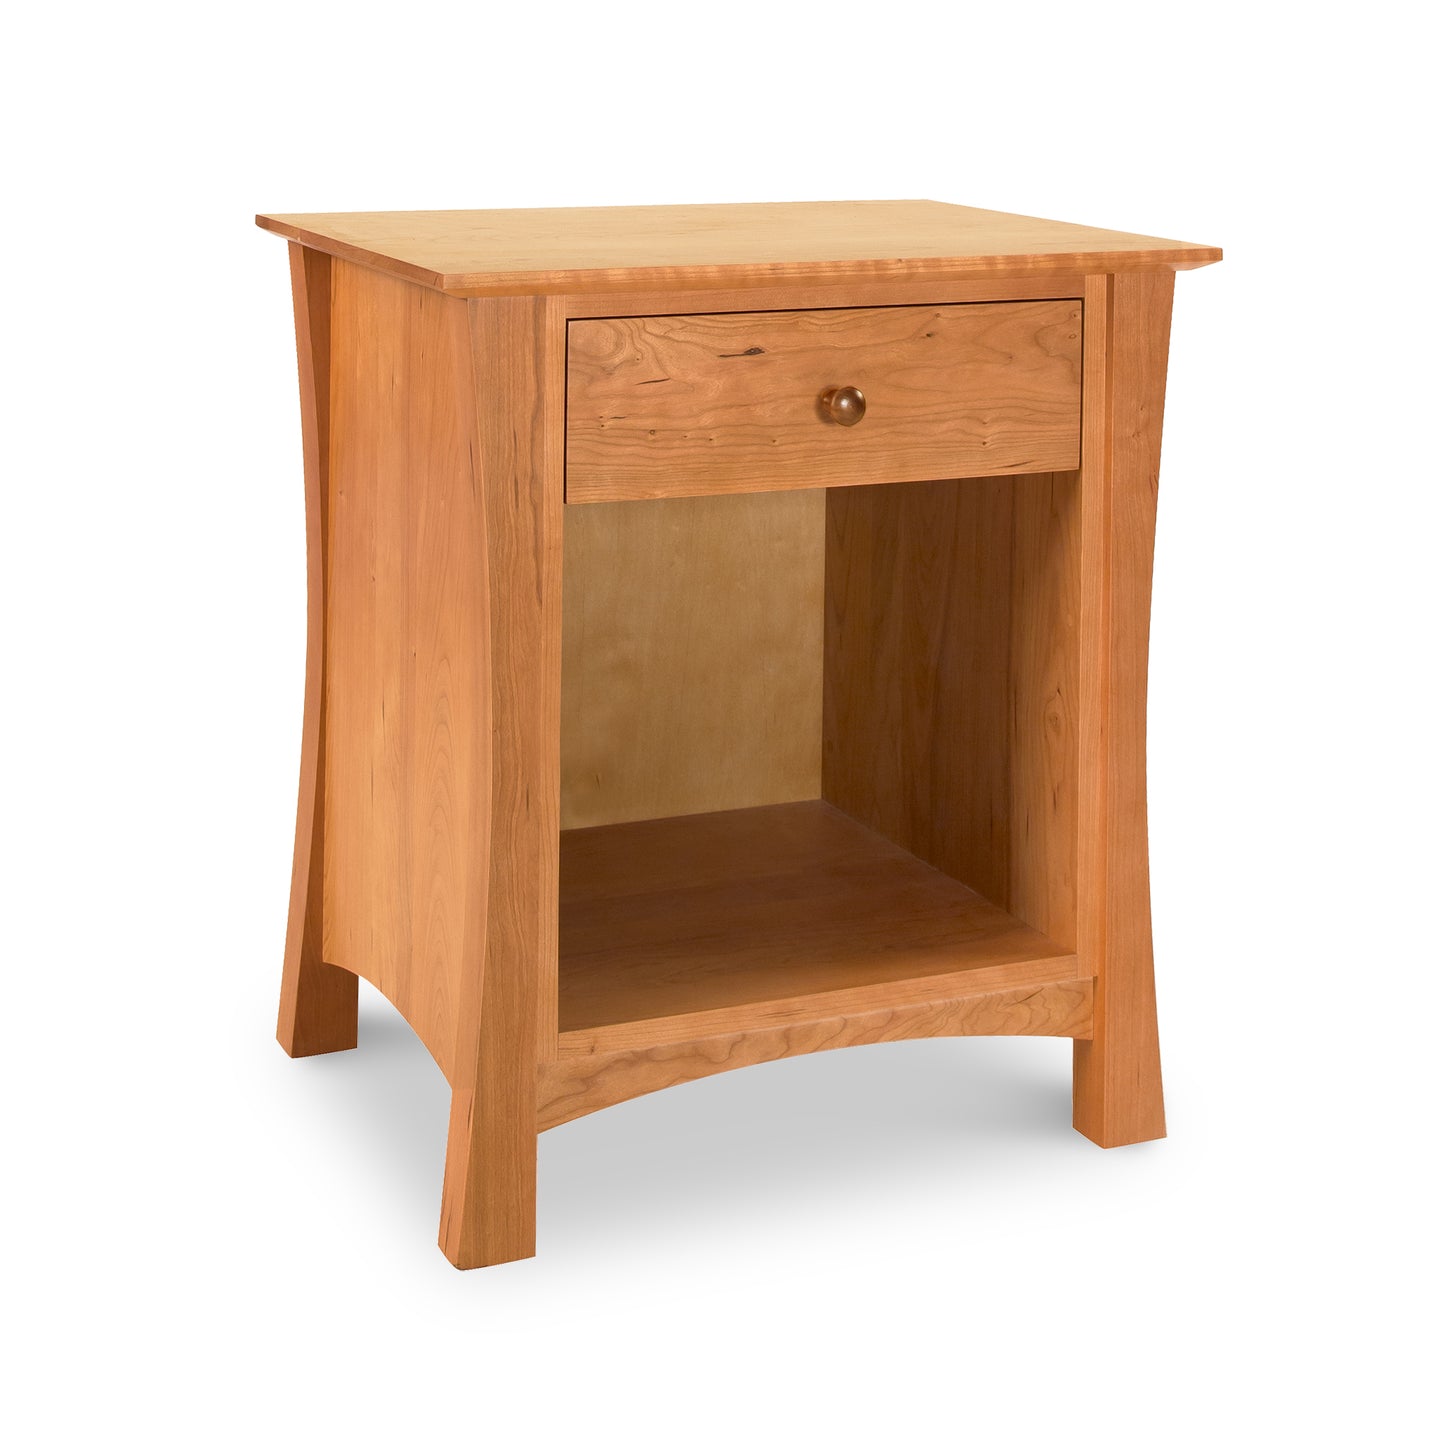 An Andrews 1-Drawer Enclosed Shelf Nightstand crafted from natural hardwoods with convenient storage space provided by a drawer, made by Lyndon Furniture.